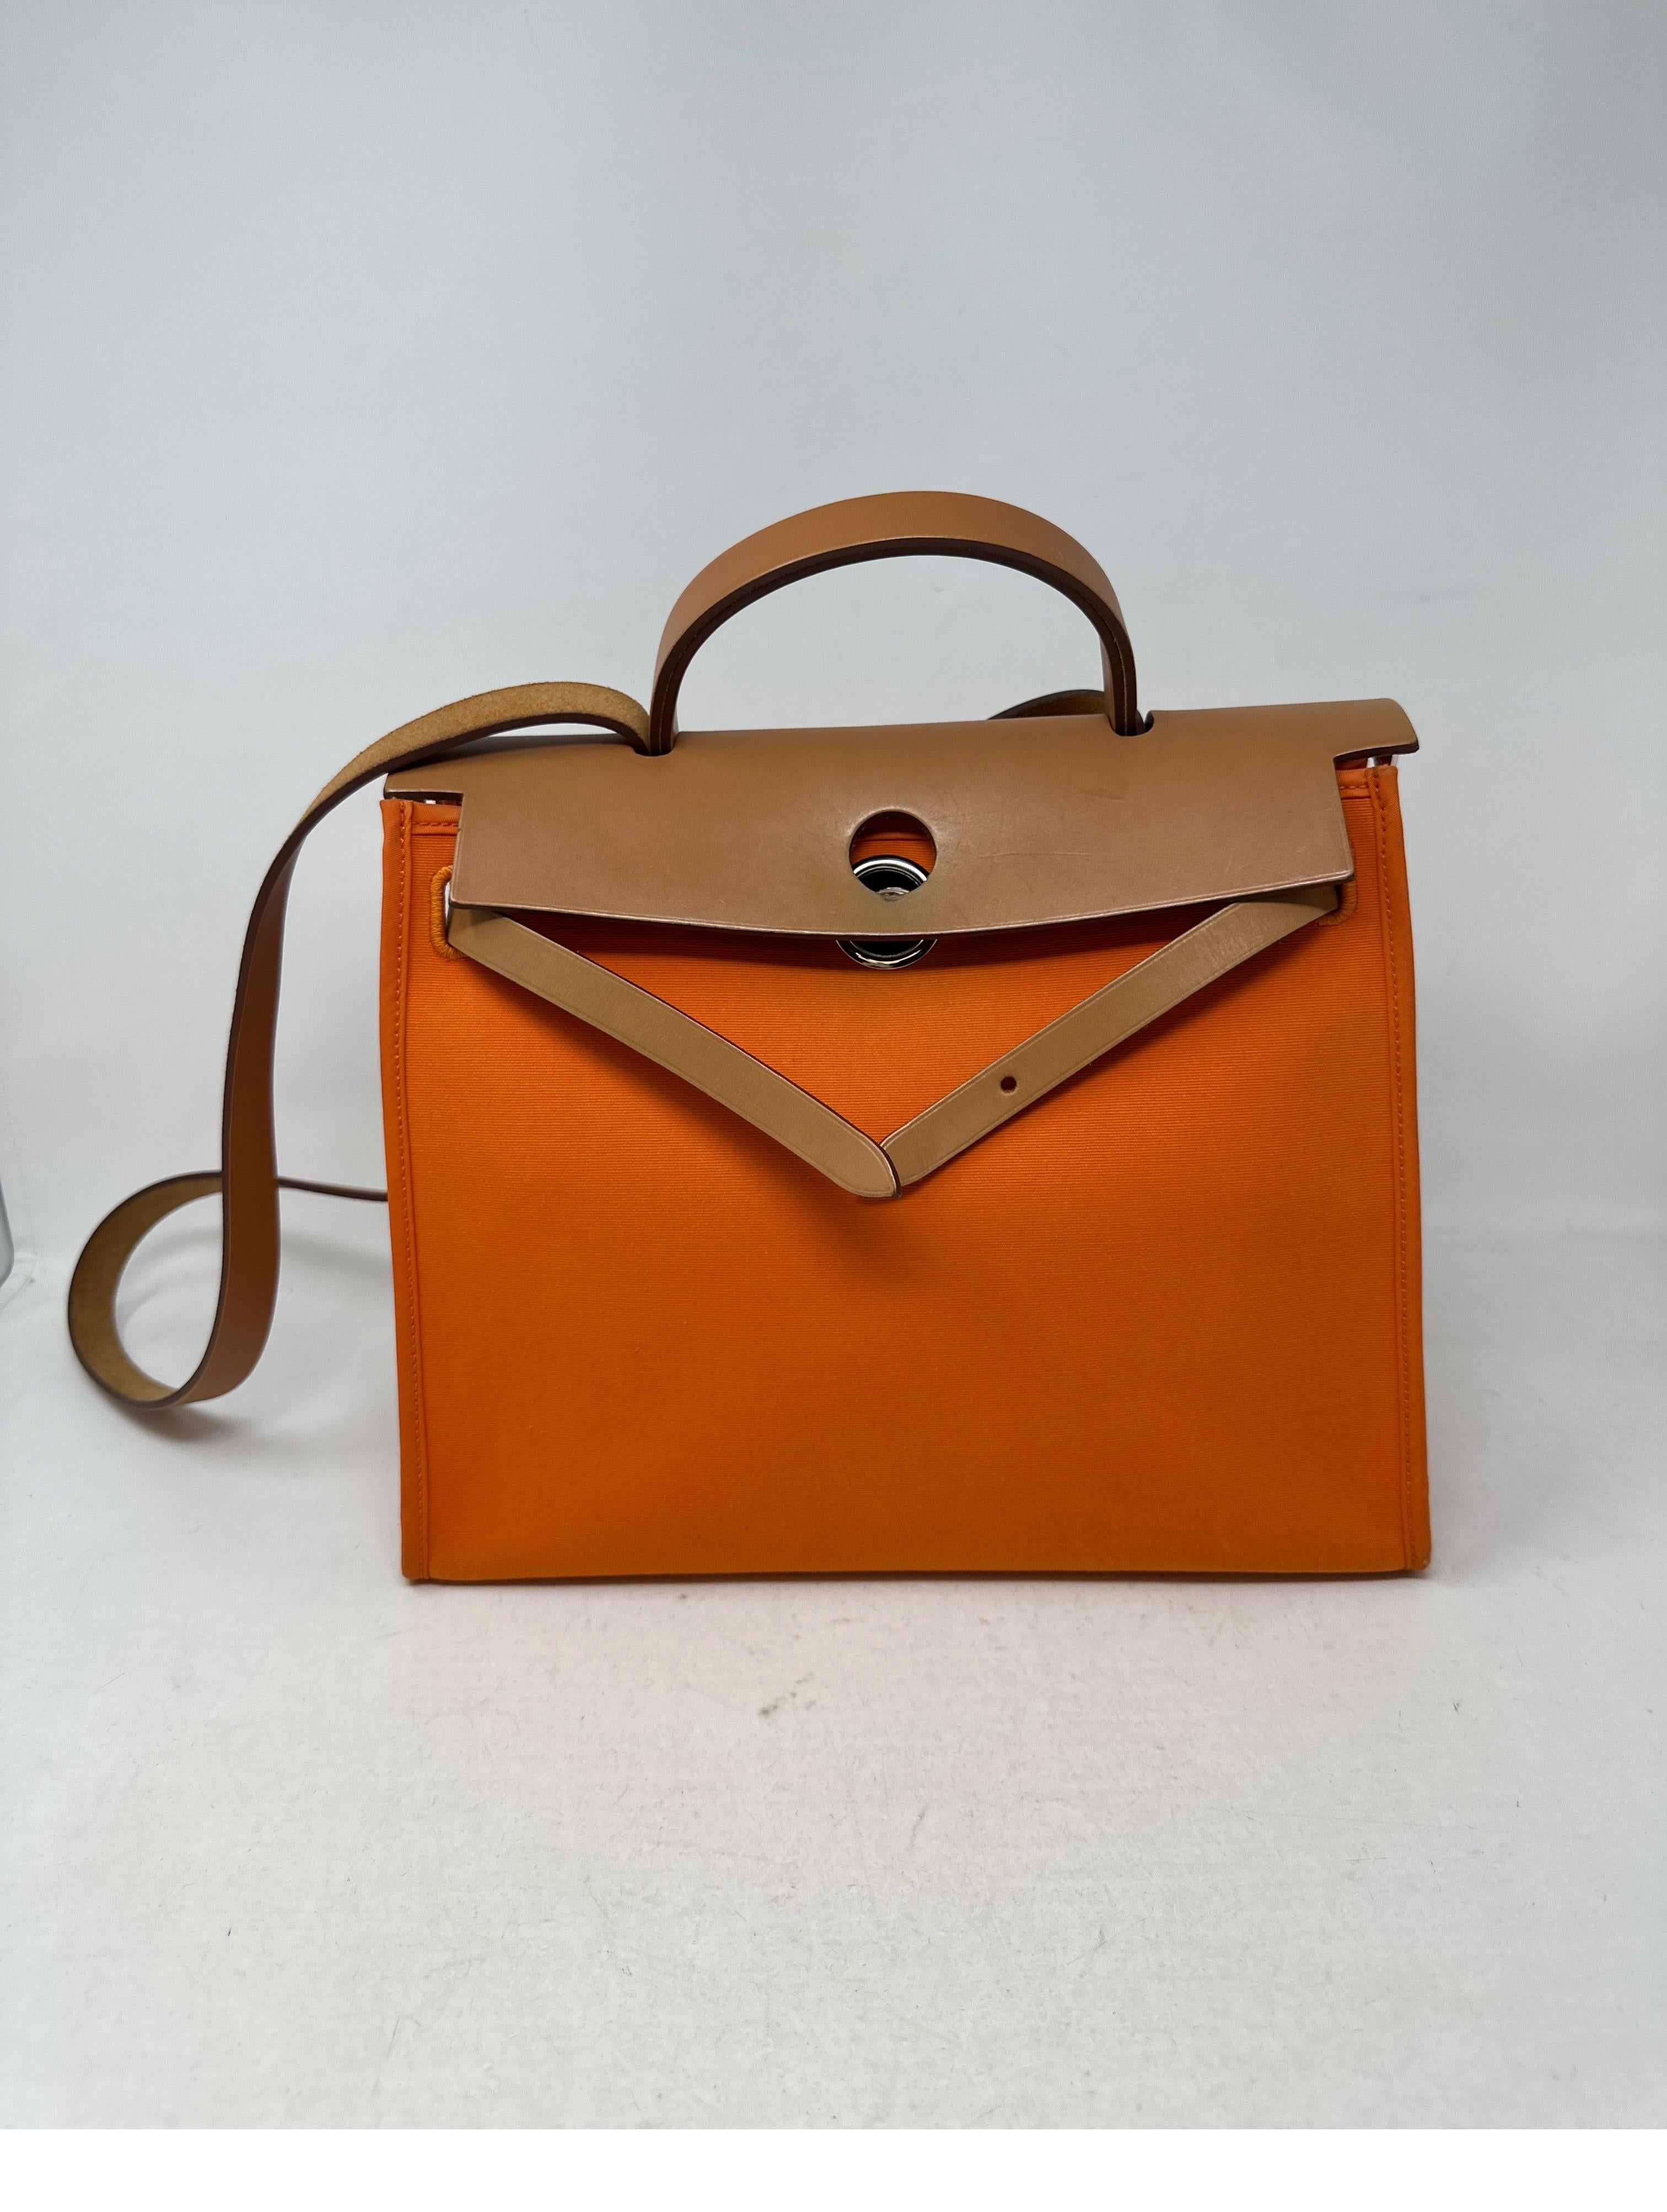 Hermes Orange 31 Her Bag. Q stamp. Excellent condition. Interior and exterior clean. Great crossbody bag. Includes pouch, padlock, key, clochette. Guaranteed authentic. 